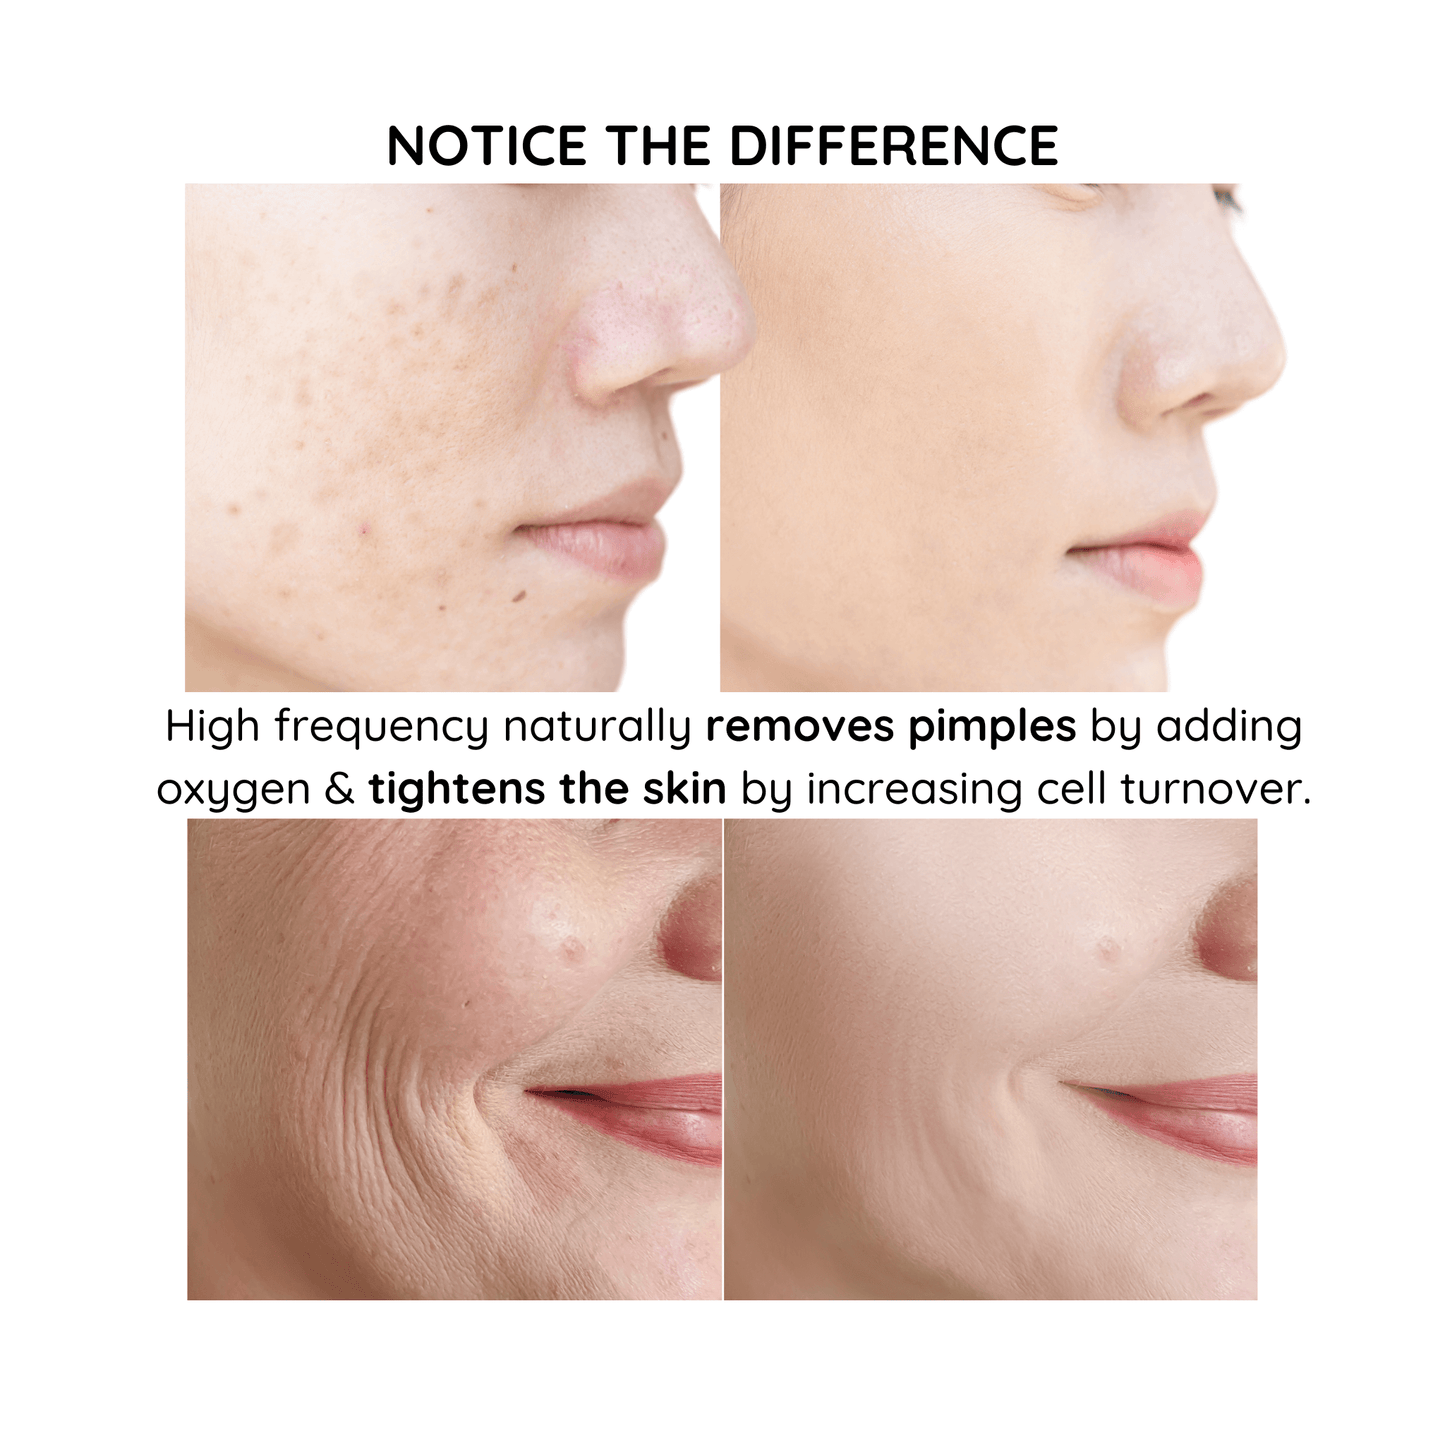 high frequency wand before and after photos of a smiling womans face showing effective pimple reduction and fine line reduction